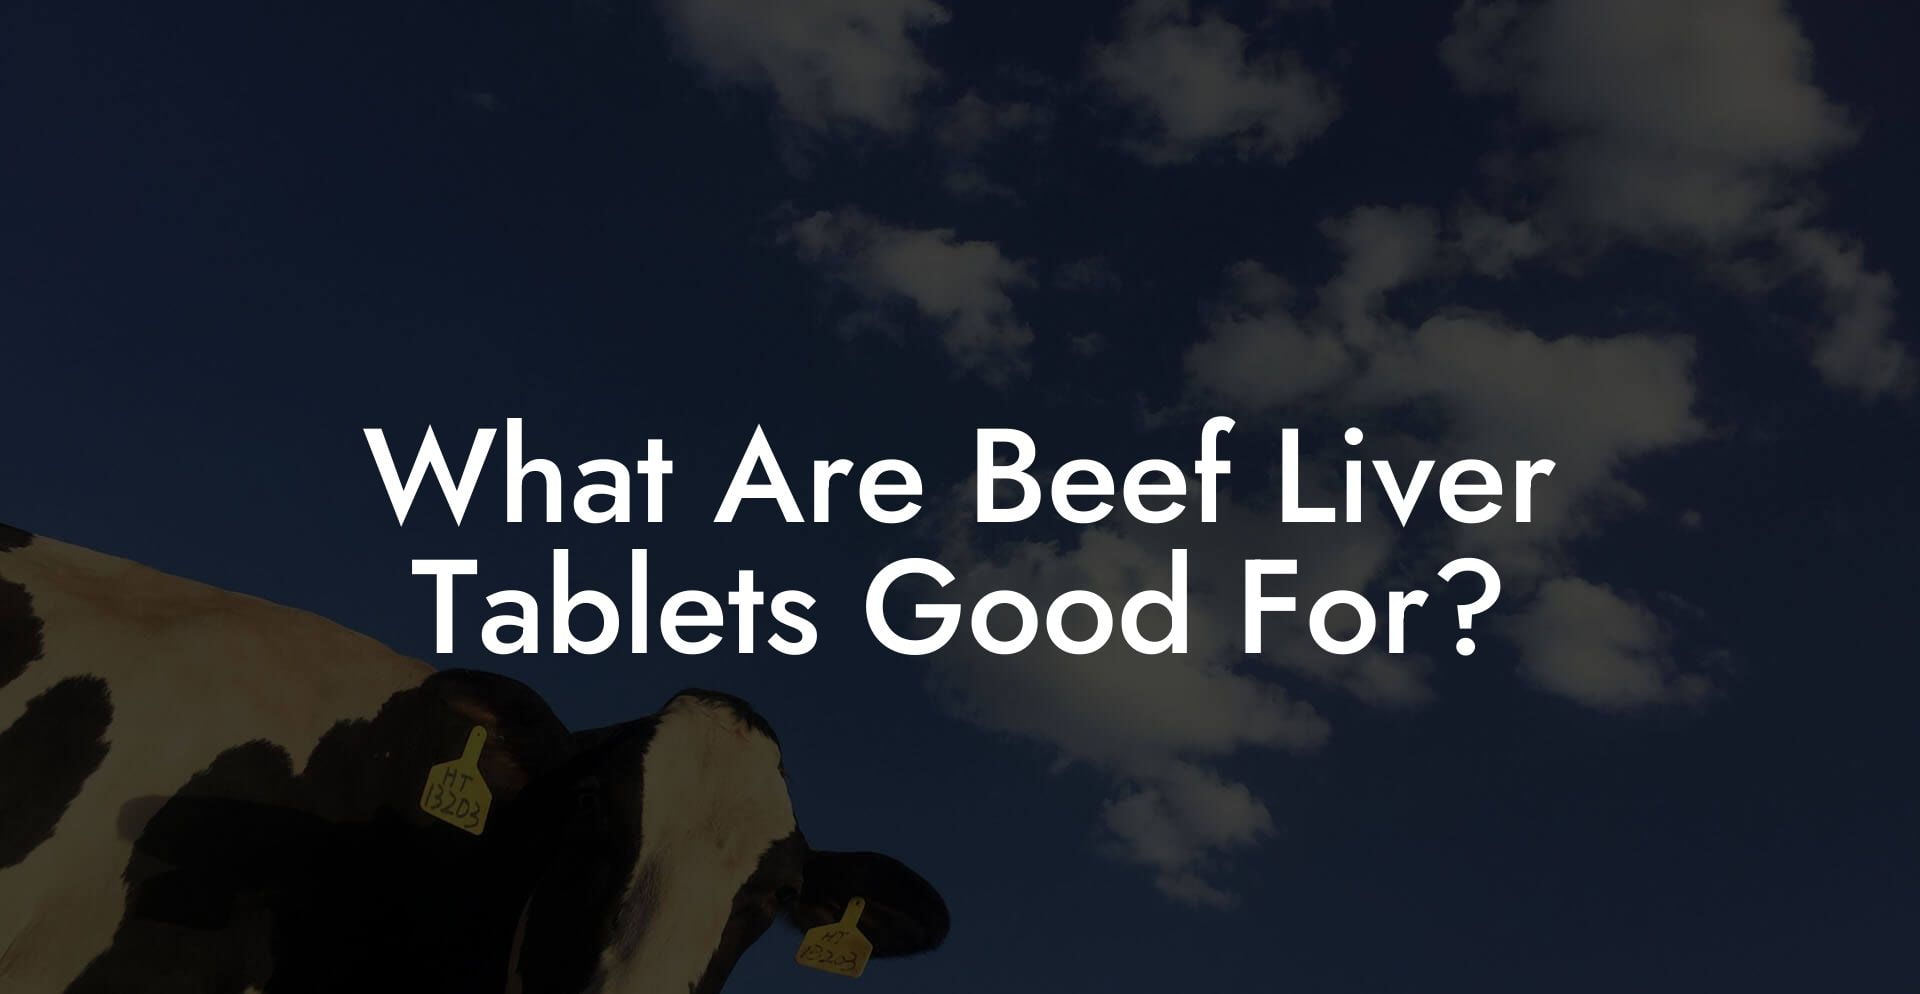 What Are Beef Liver Tablets Good For?